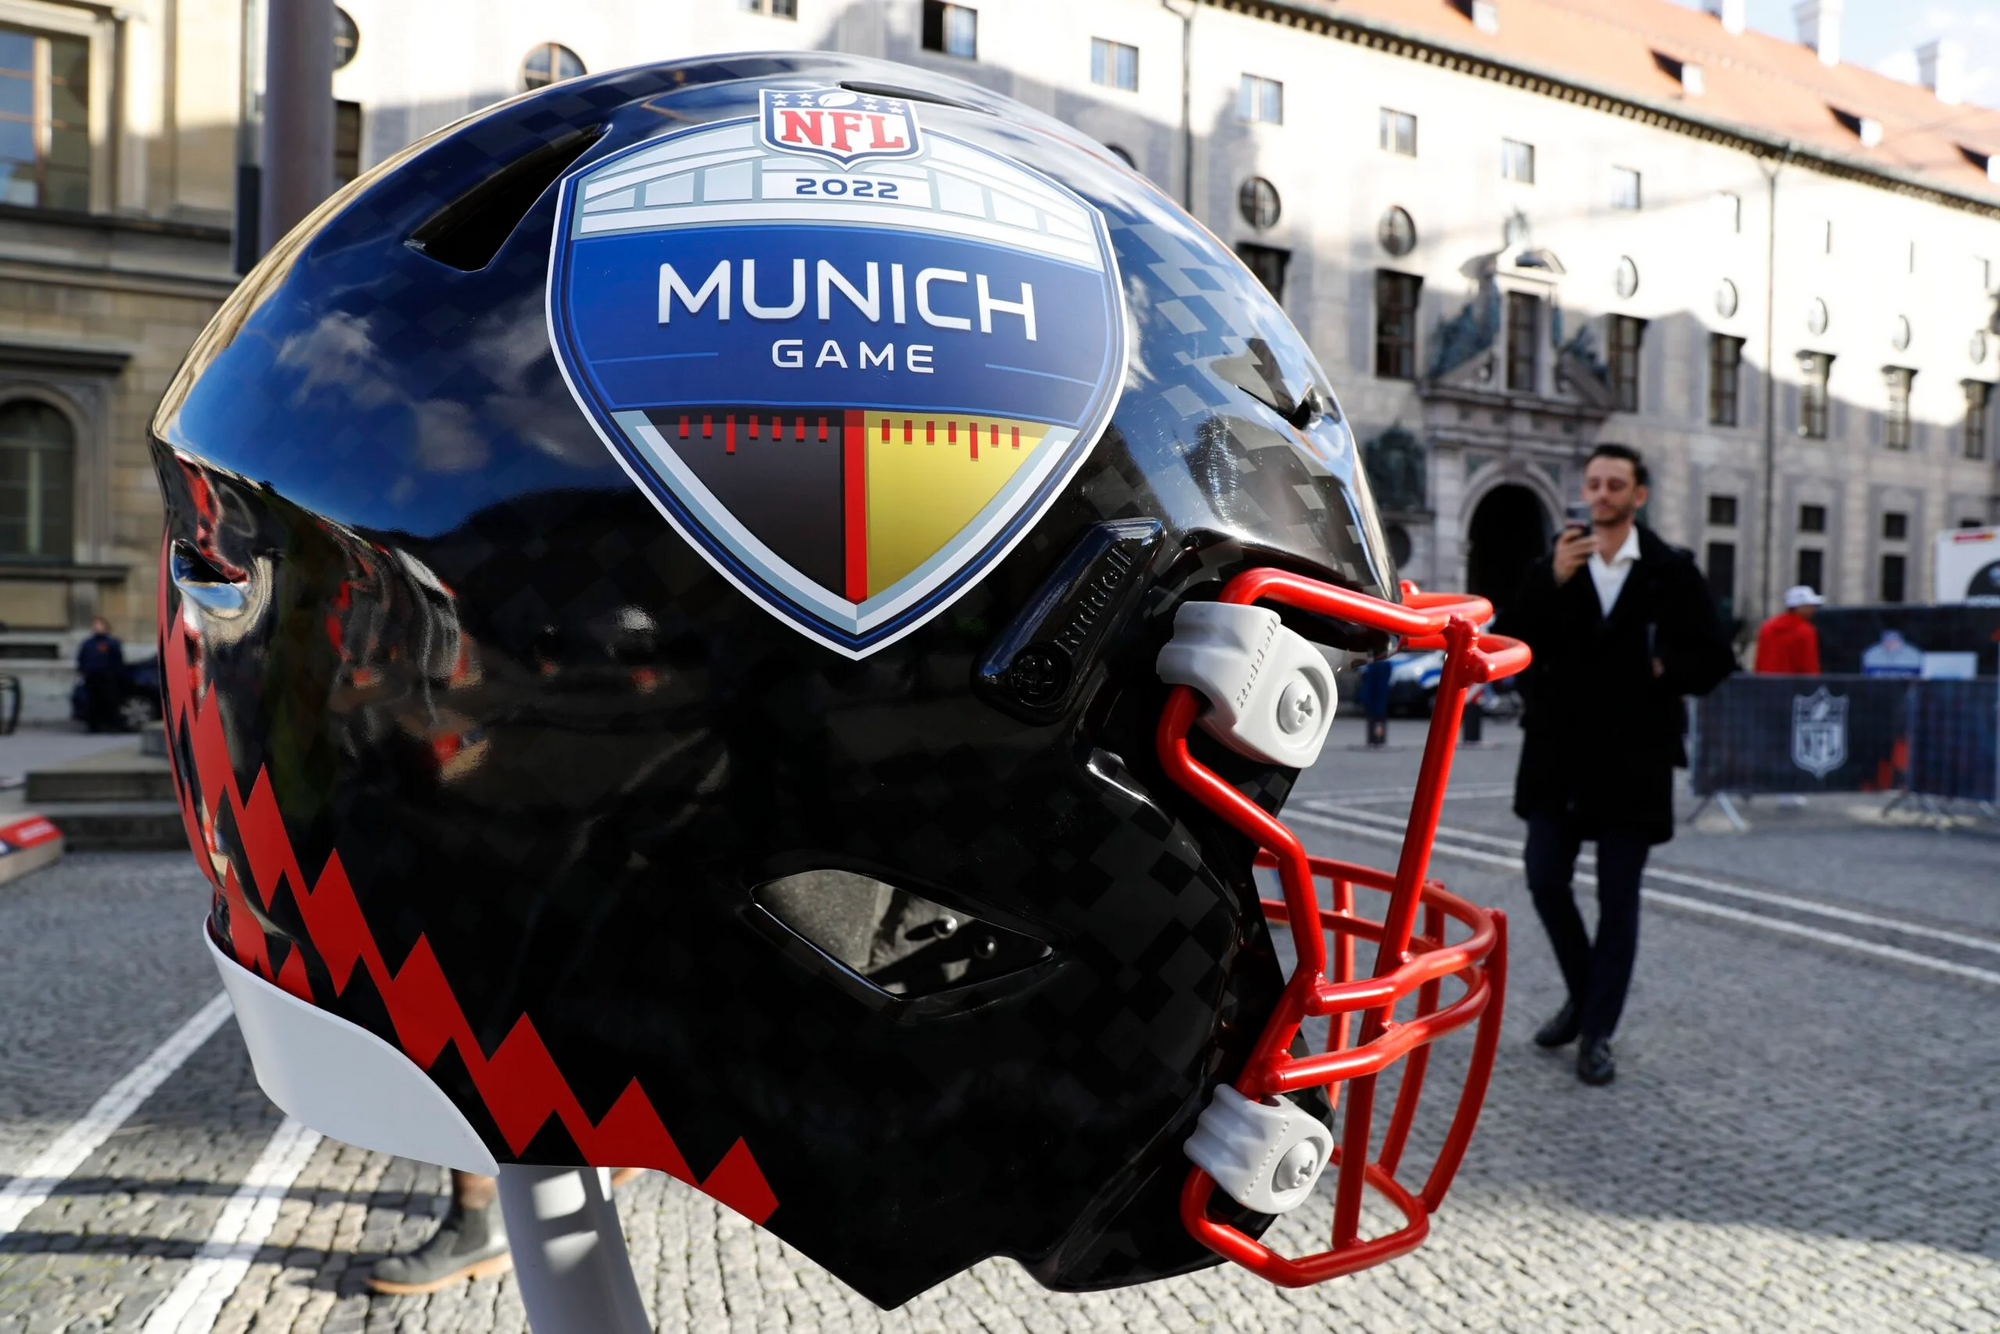 Why You Should Travel To Germany To See An NFL Game